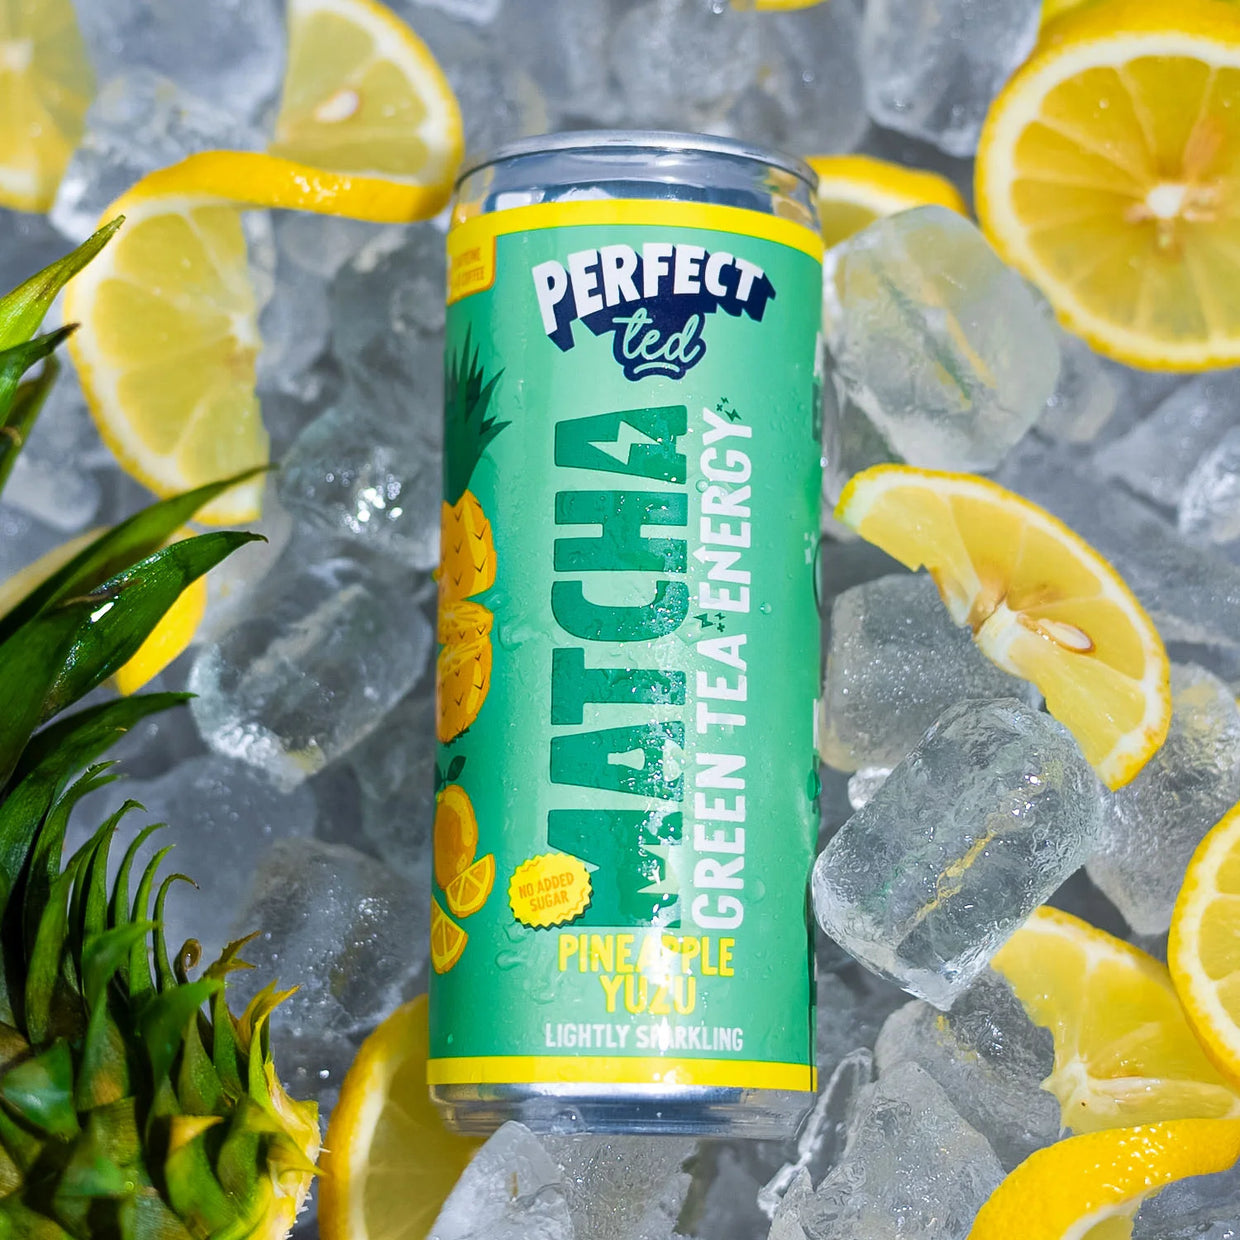 Pineapple Yuzu healthy energy drink on ice with sliced citrus fruit